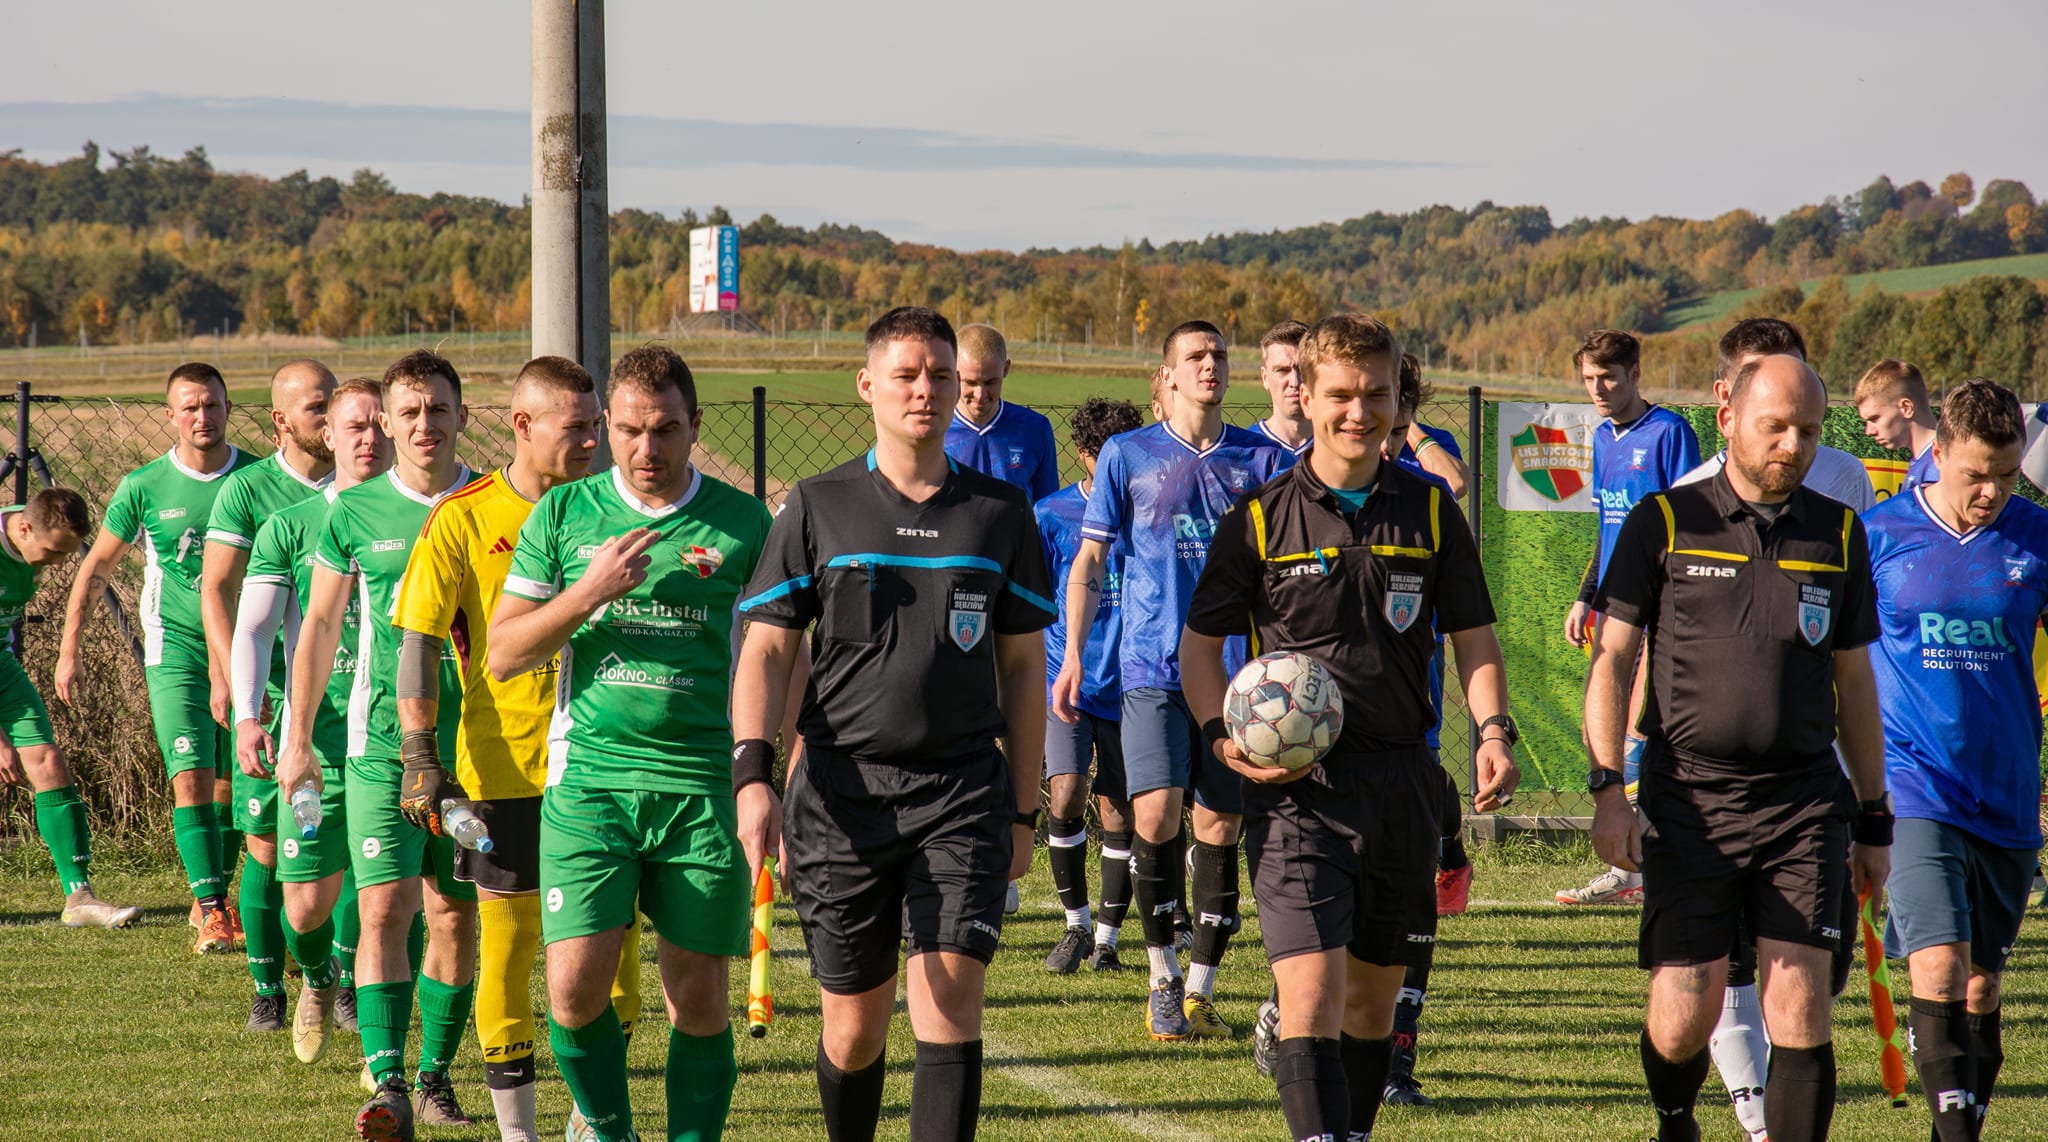 Victoria Smroków and Krakow Dragoons FC players, together with referees, entering the field